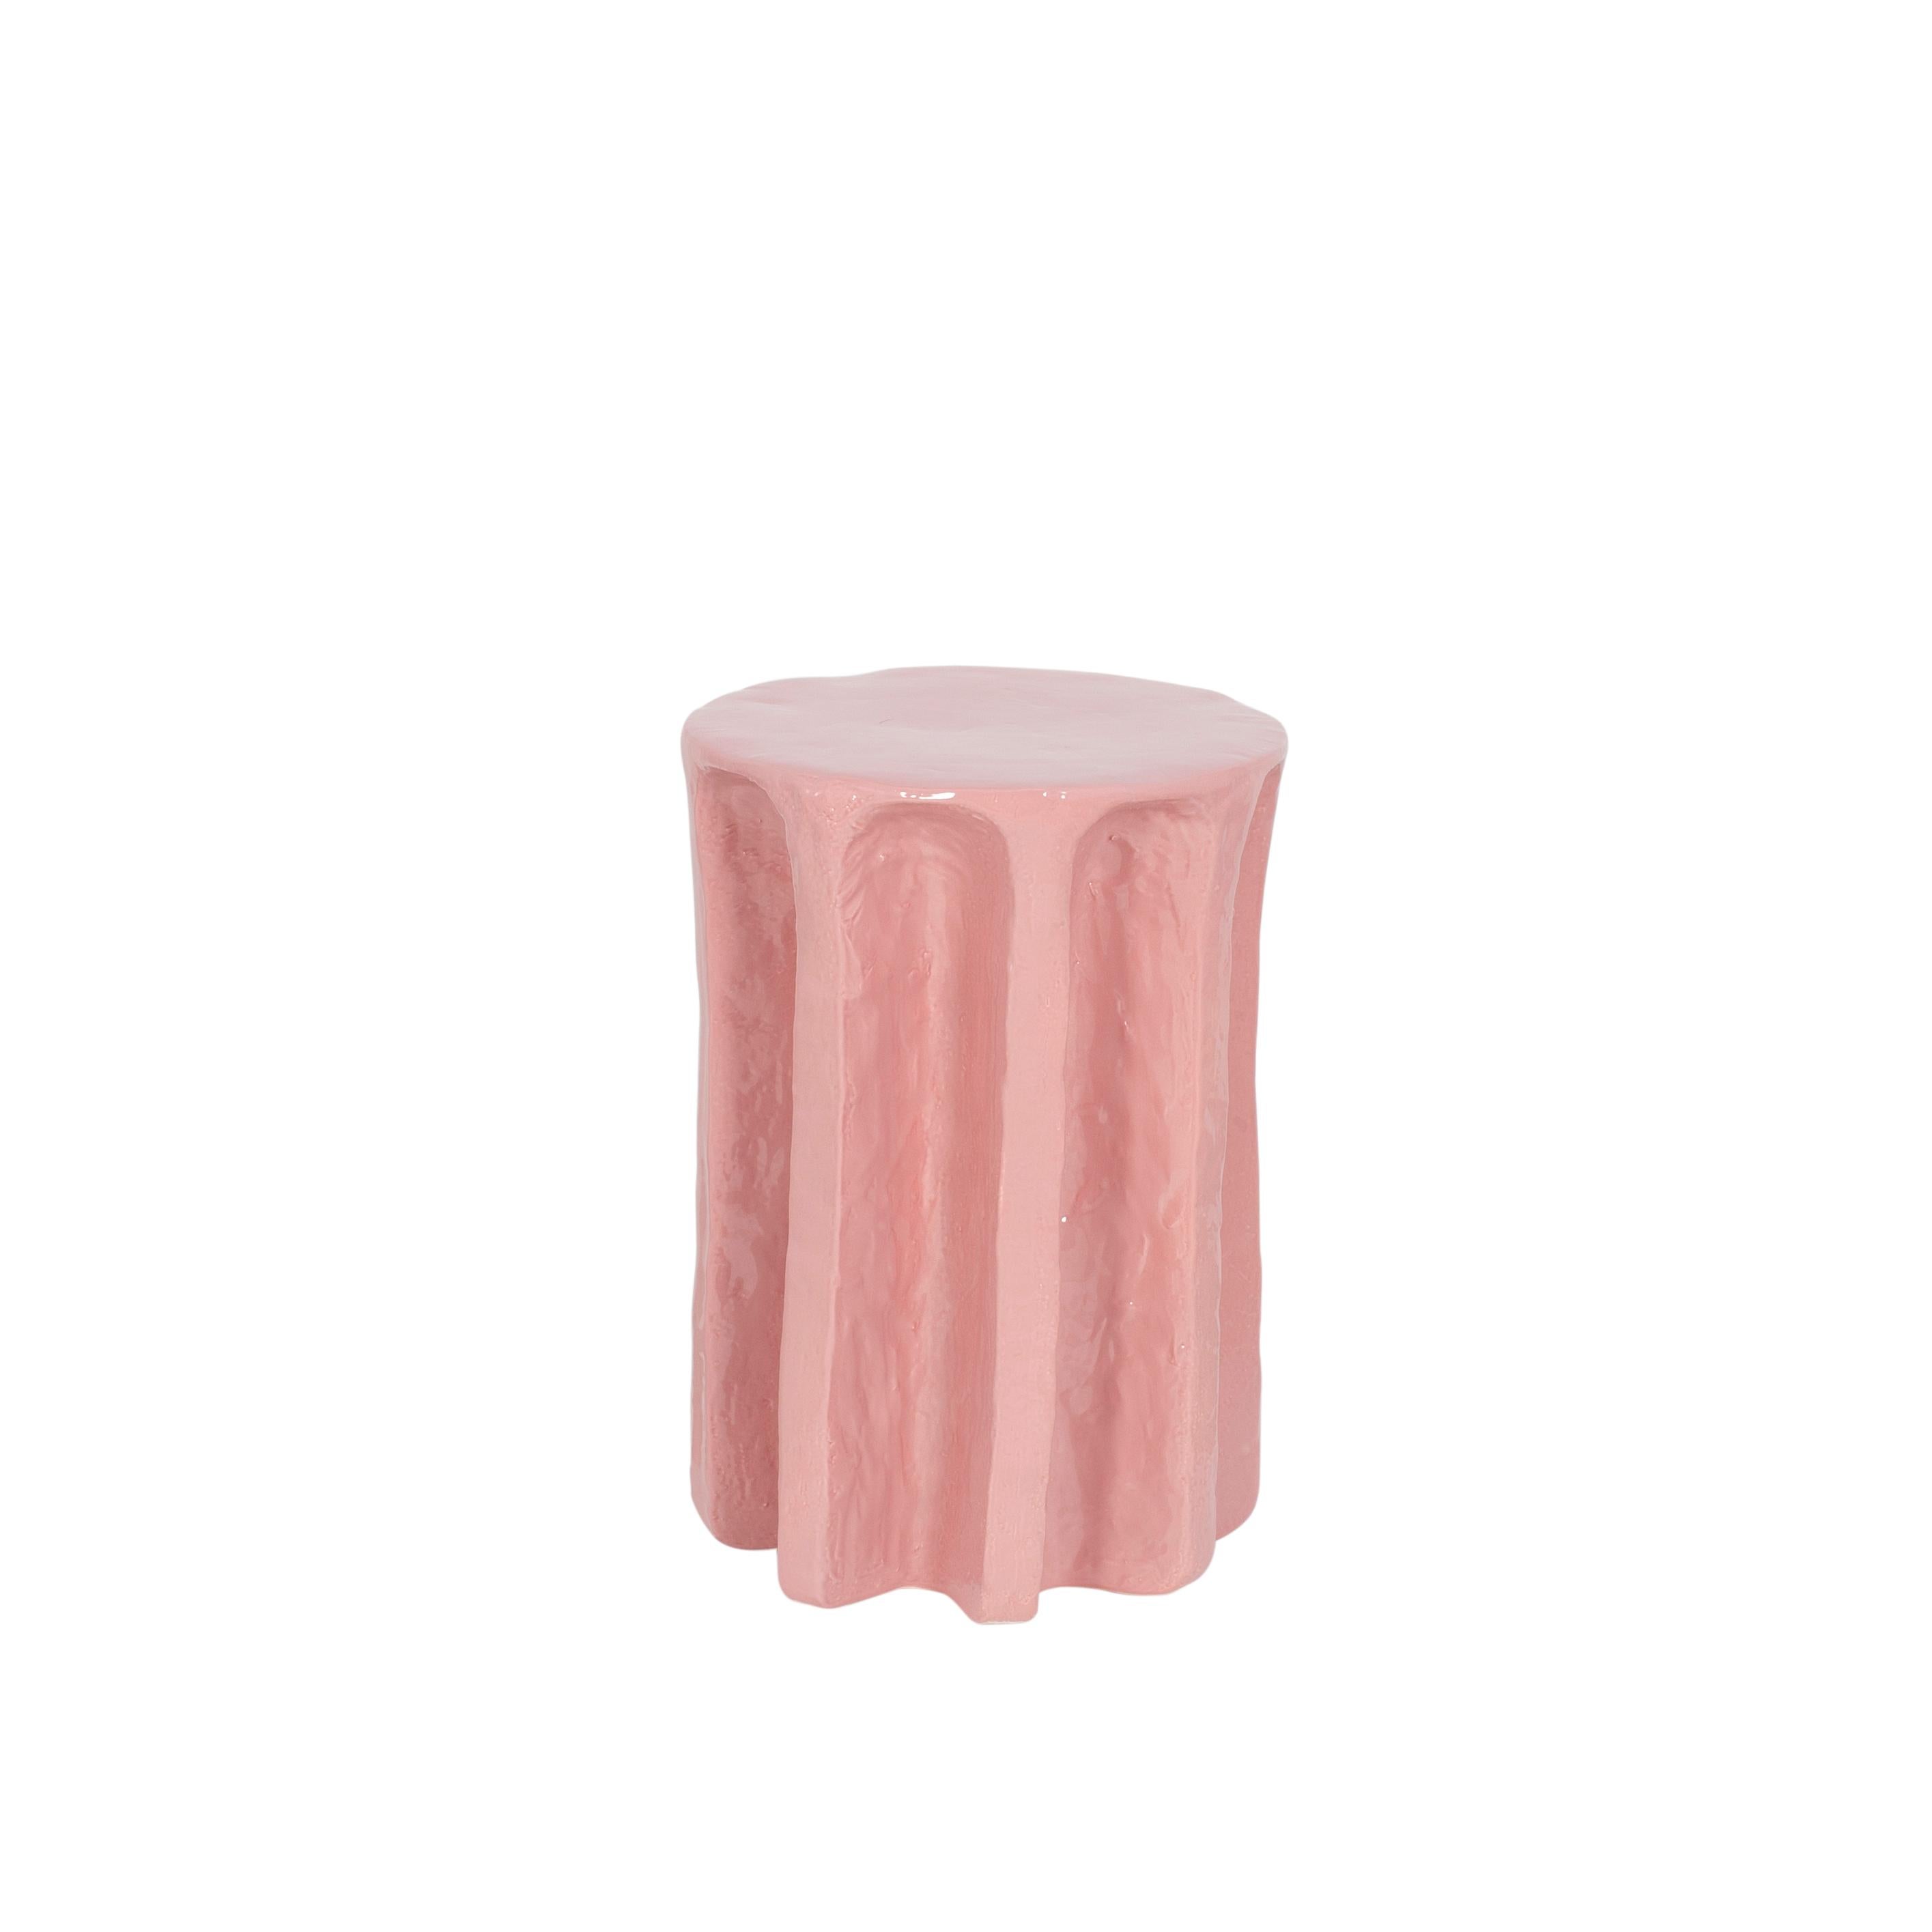 Chouchou high rose side table by Pulpo
Dimensions: D 39 x H 57 cm
Materials: ceramic

Also available in different colours.

Chouchou bears the contours of an antique column – which, knowing designer Lorenzo Zanovello’s, is most likely a reference to